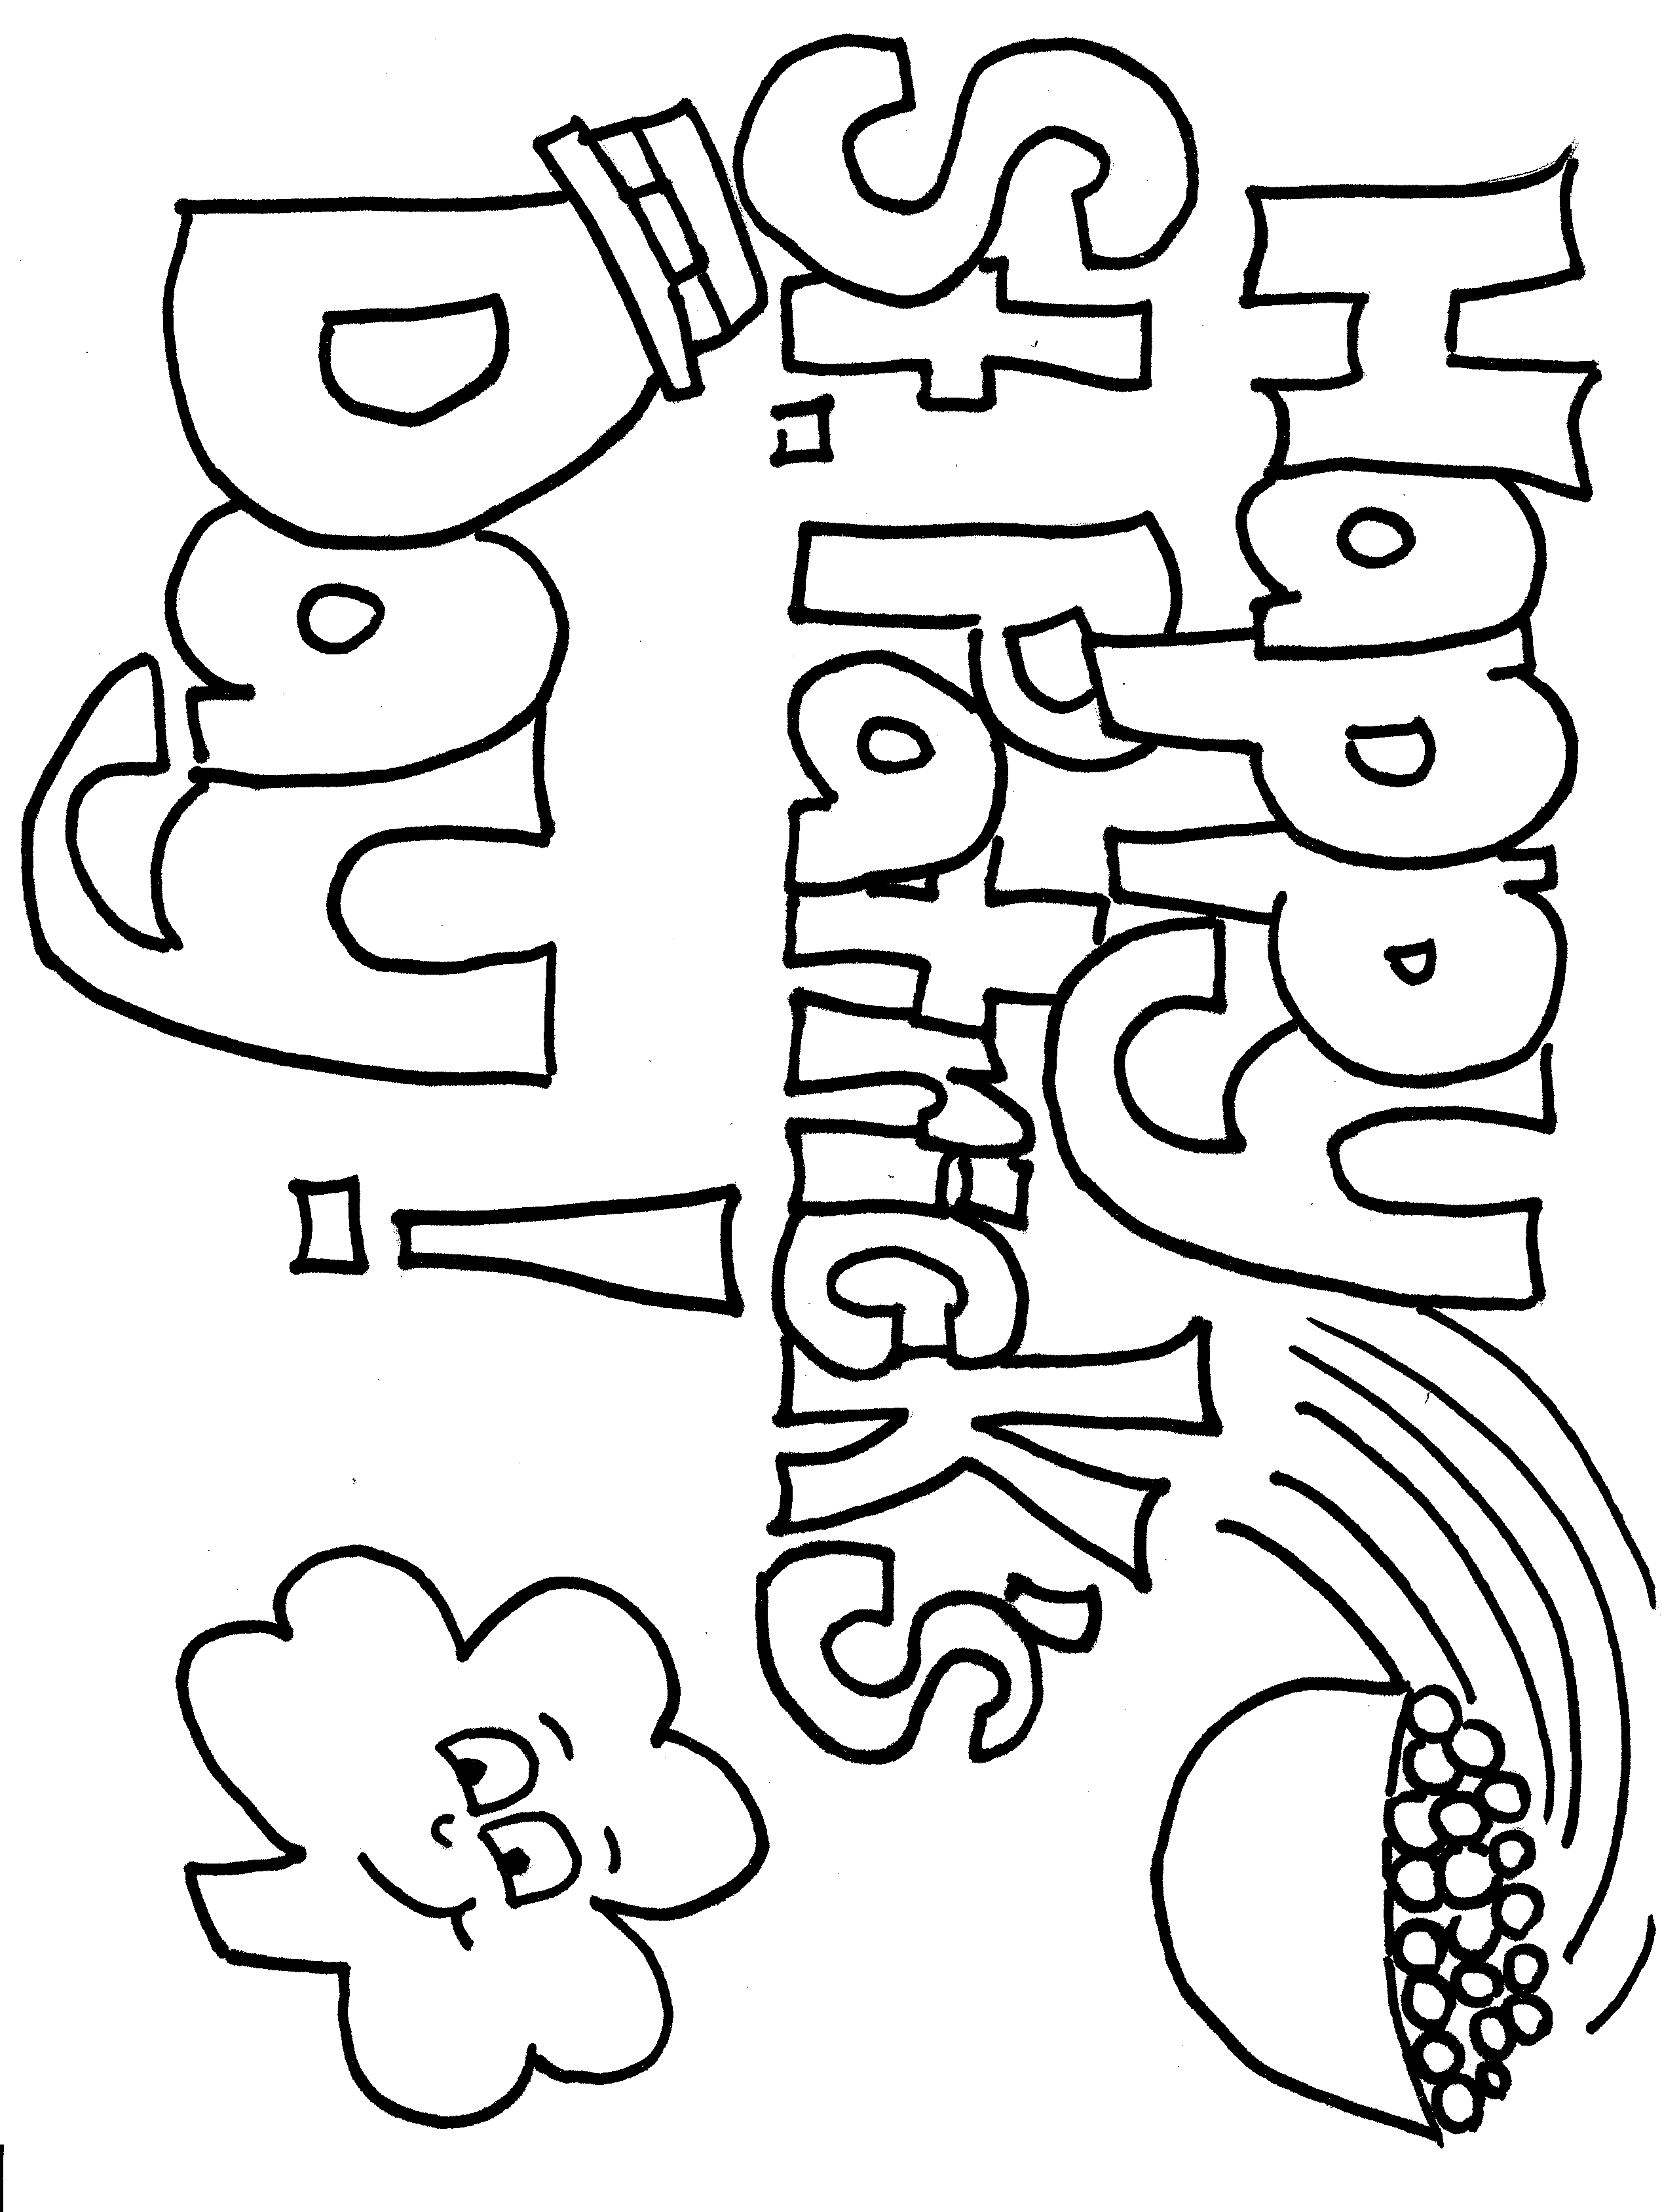 ST PATRICK DAY COLORING PAGES FOR KIDS Coloringpages321